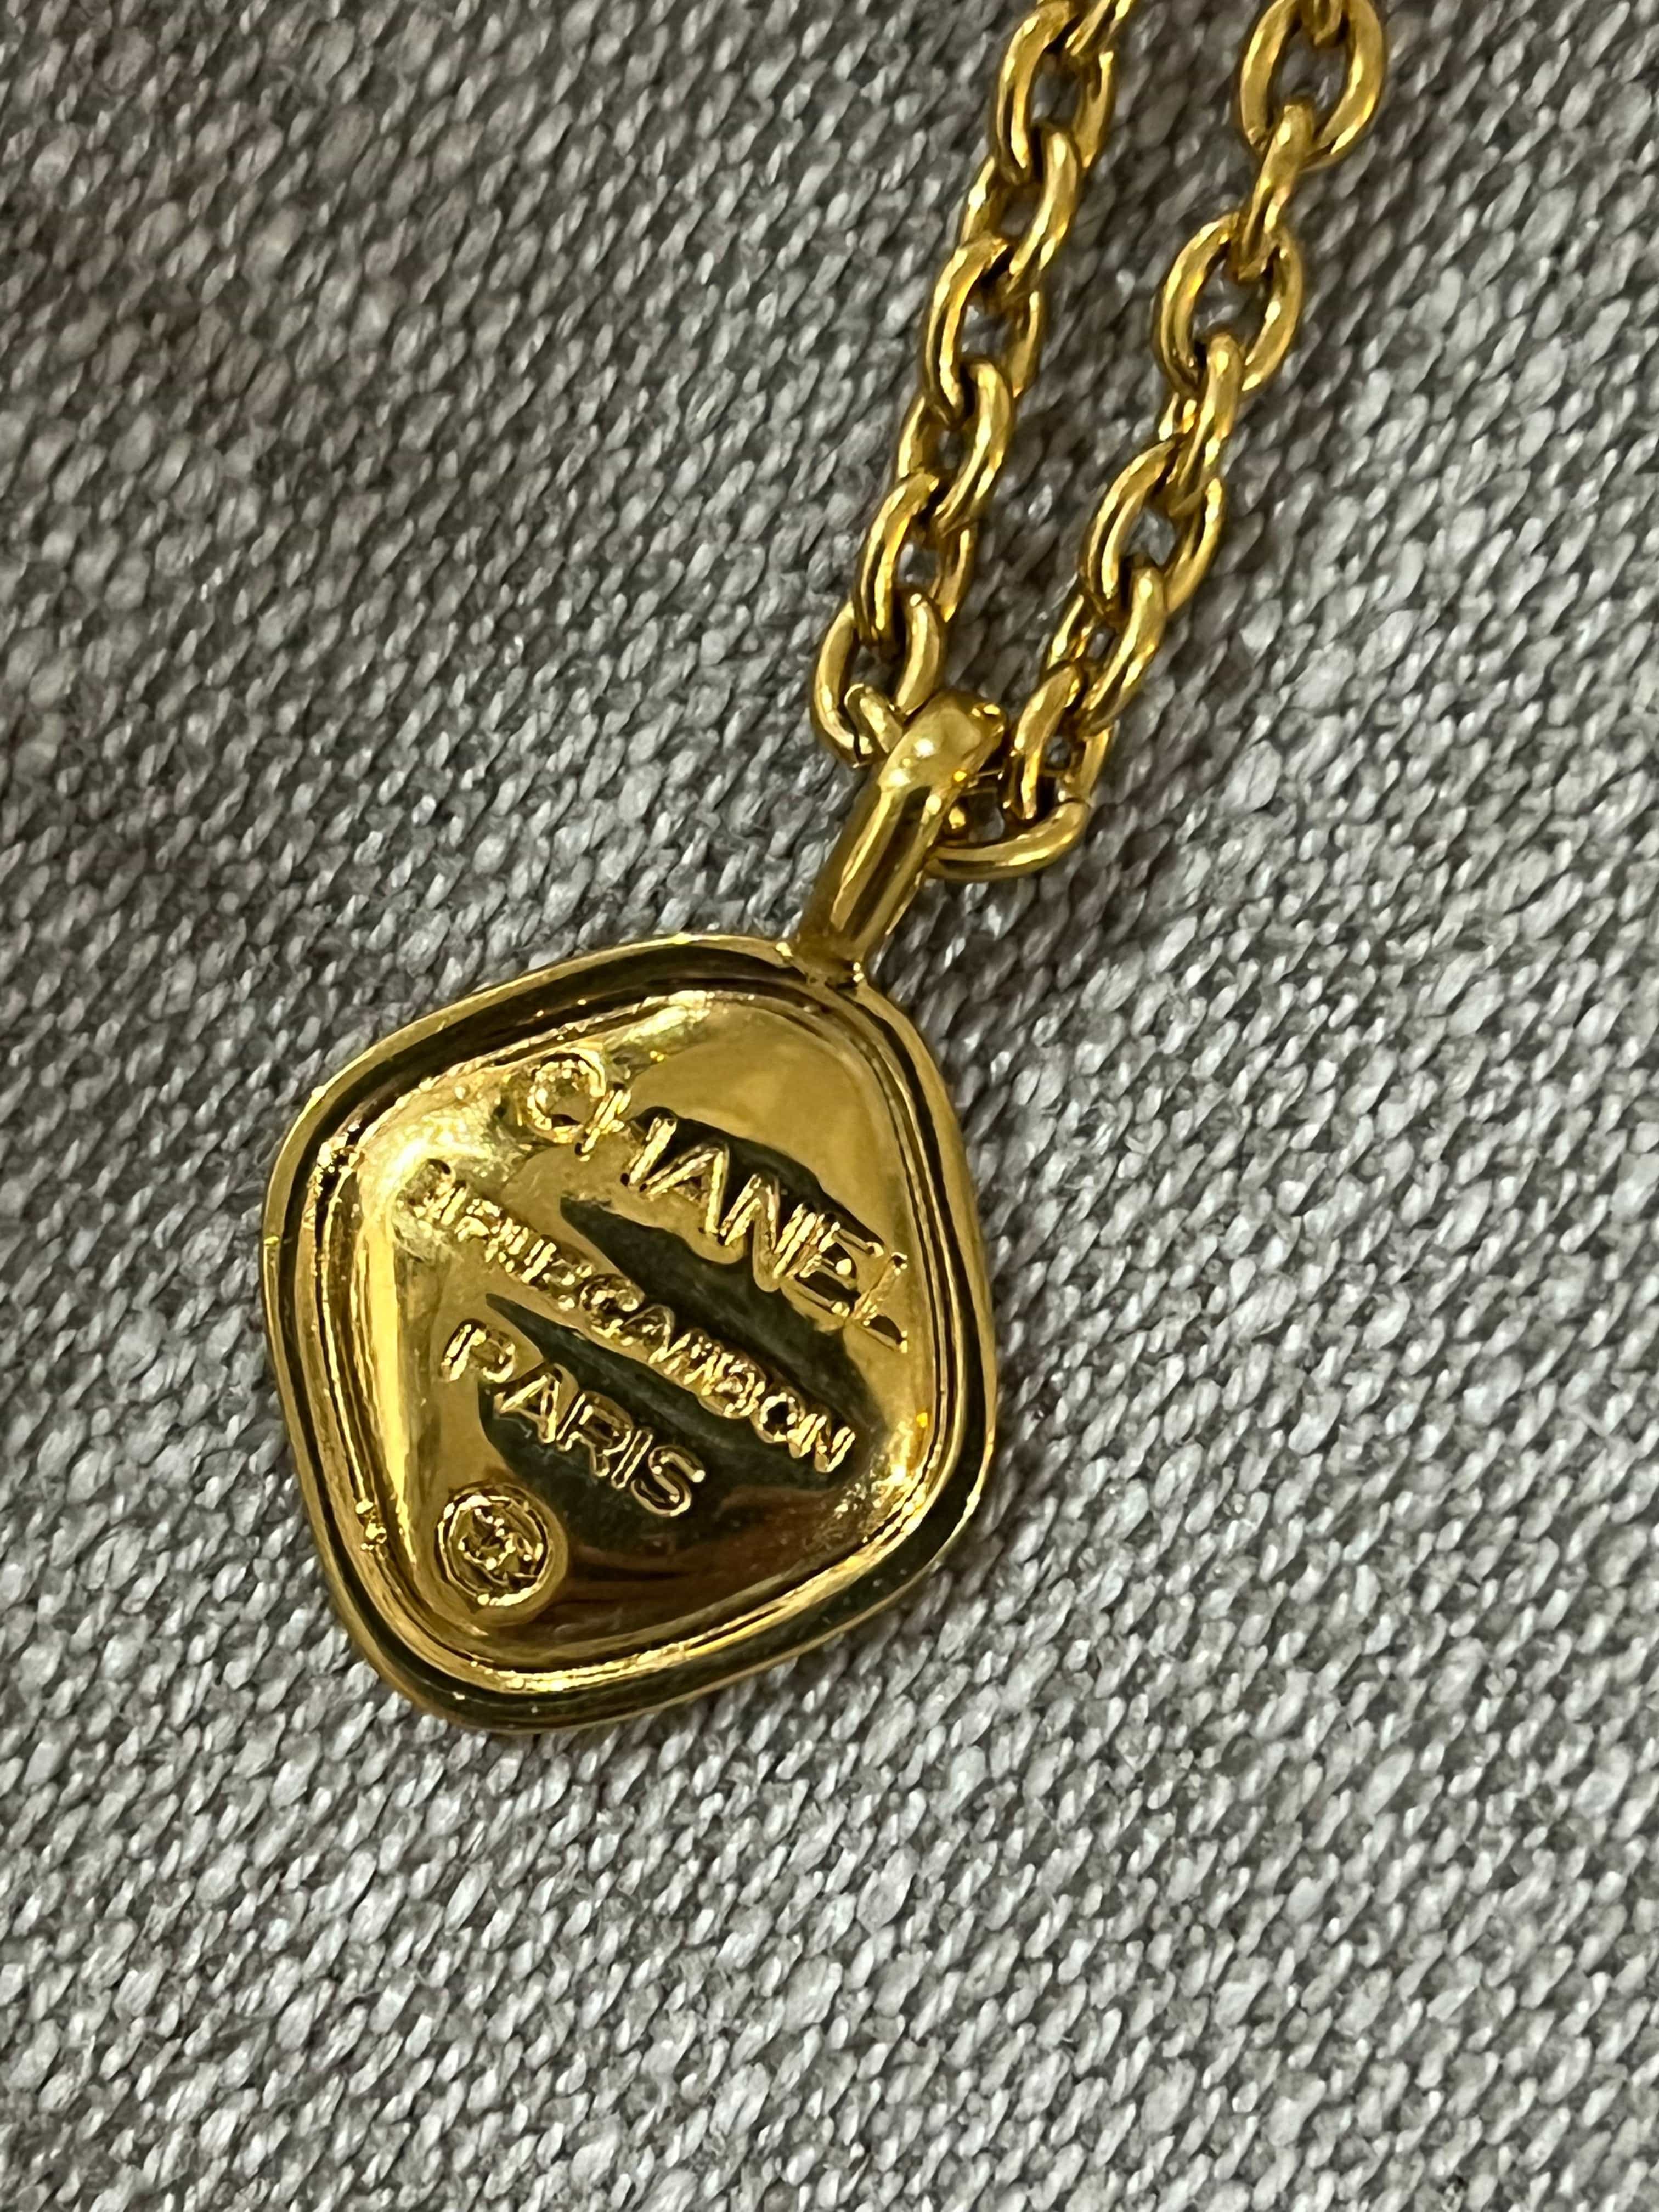 Chanel Vintage Chanel Gold Plated '31 Rue Cambon' Pendant Necklace - ASL2387